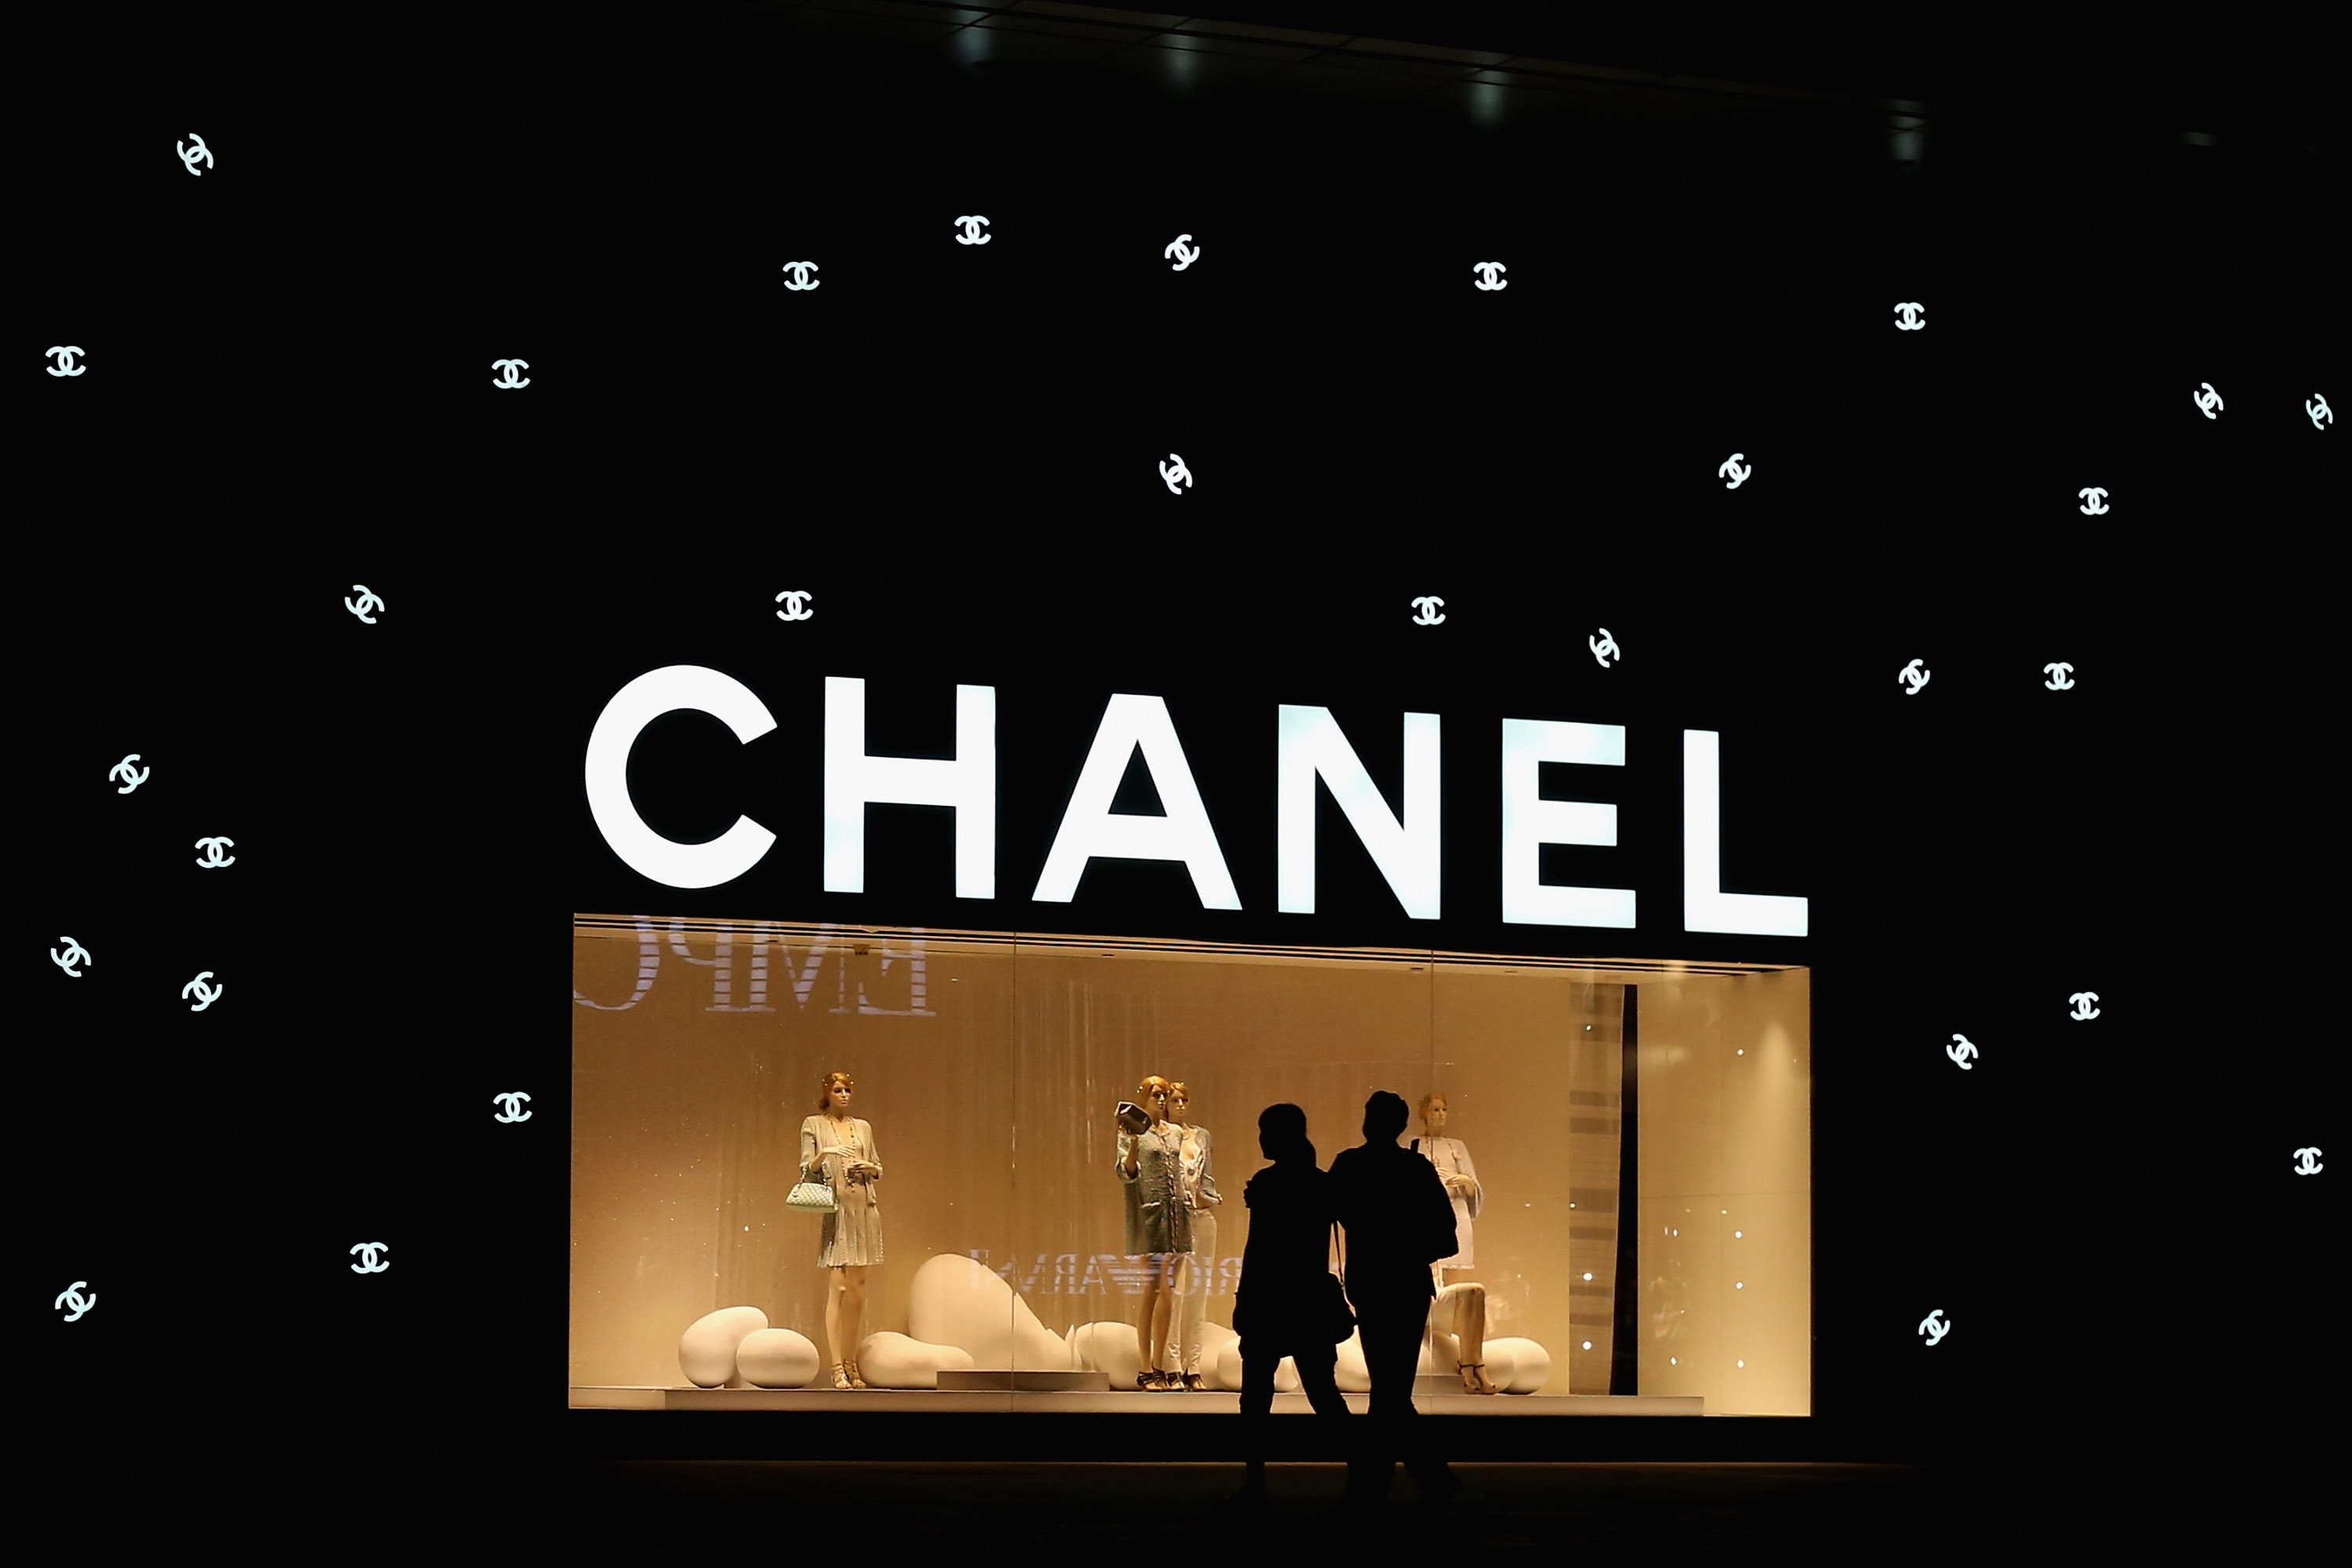 Billionaire Chanel Family's Wealth Manager Hires Former UAE Fund Boss David  Yang - Bloomberg